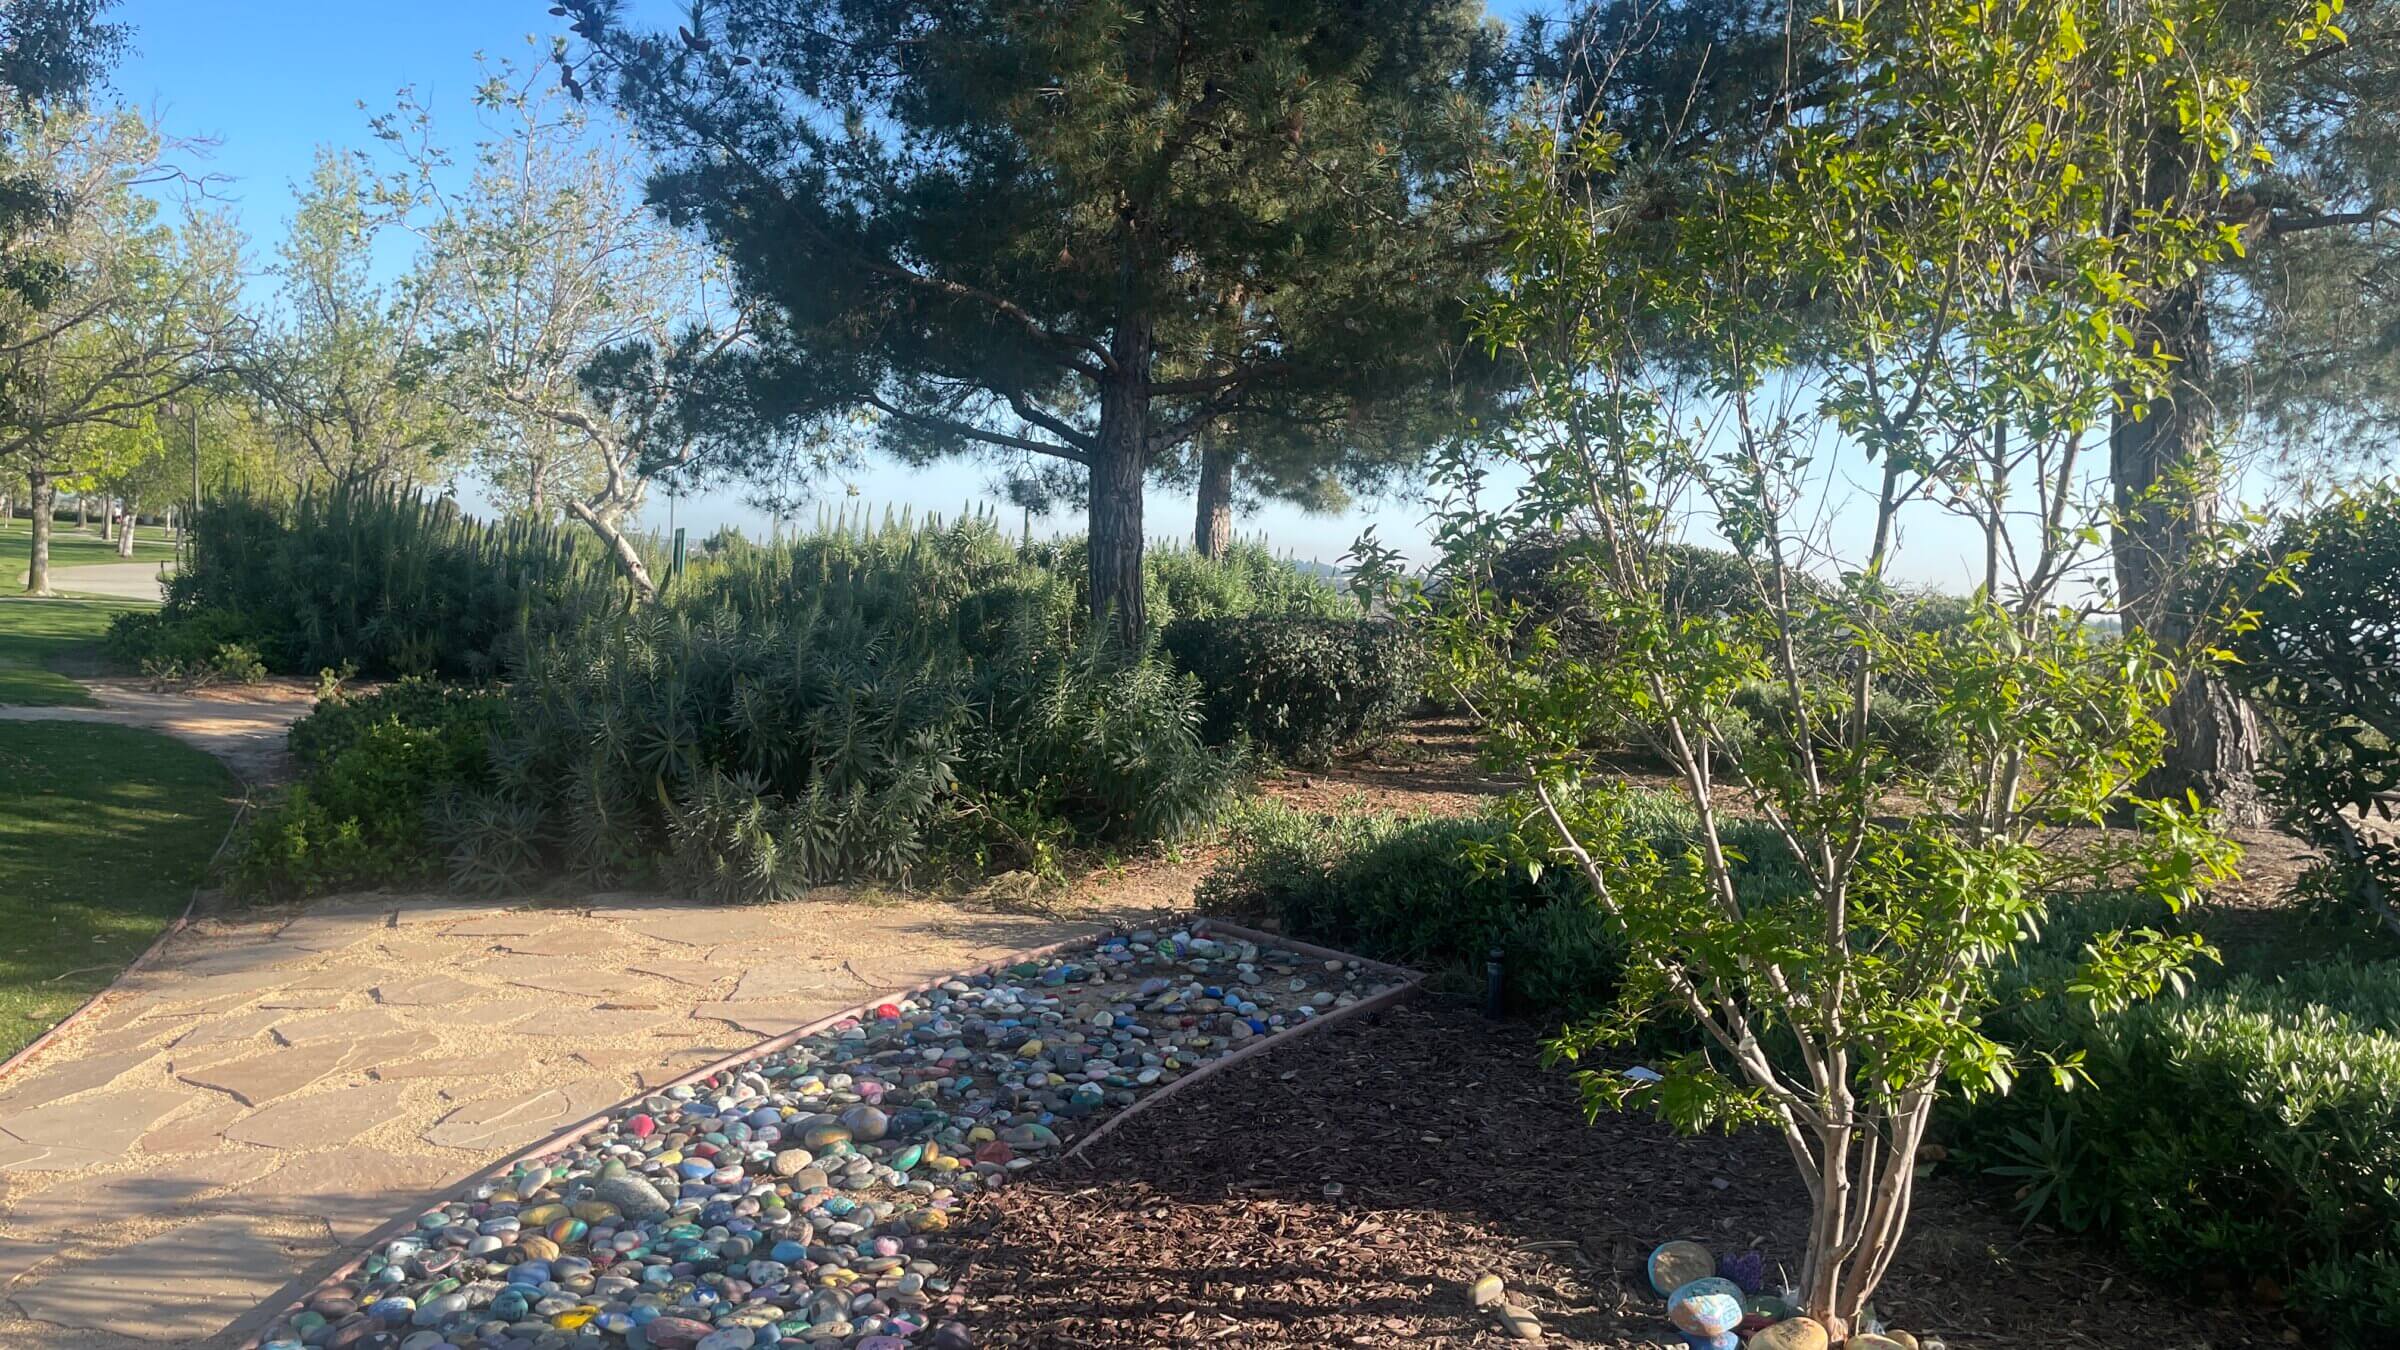 Painted rocks decorate a memorial for Blaze Bernstein at Borrego Park in Lake Forest, California. On June 20, Samuel Woodward described killing and burying Bernstein in the park.